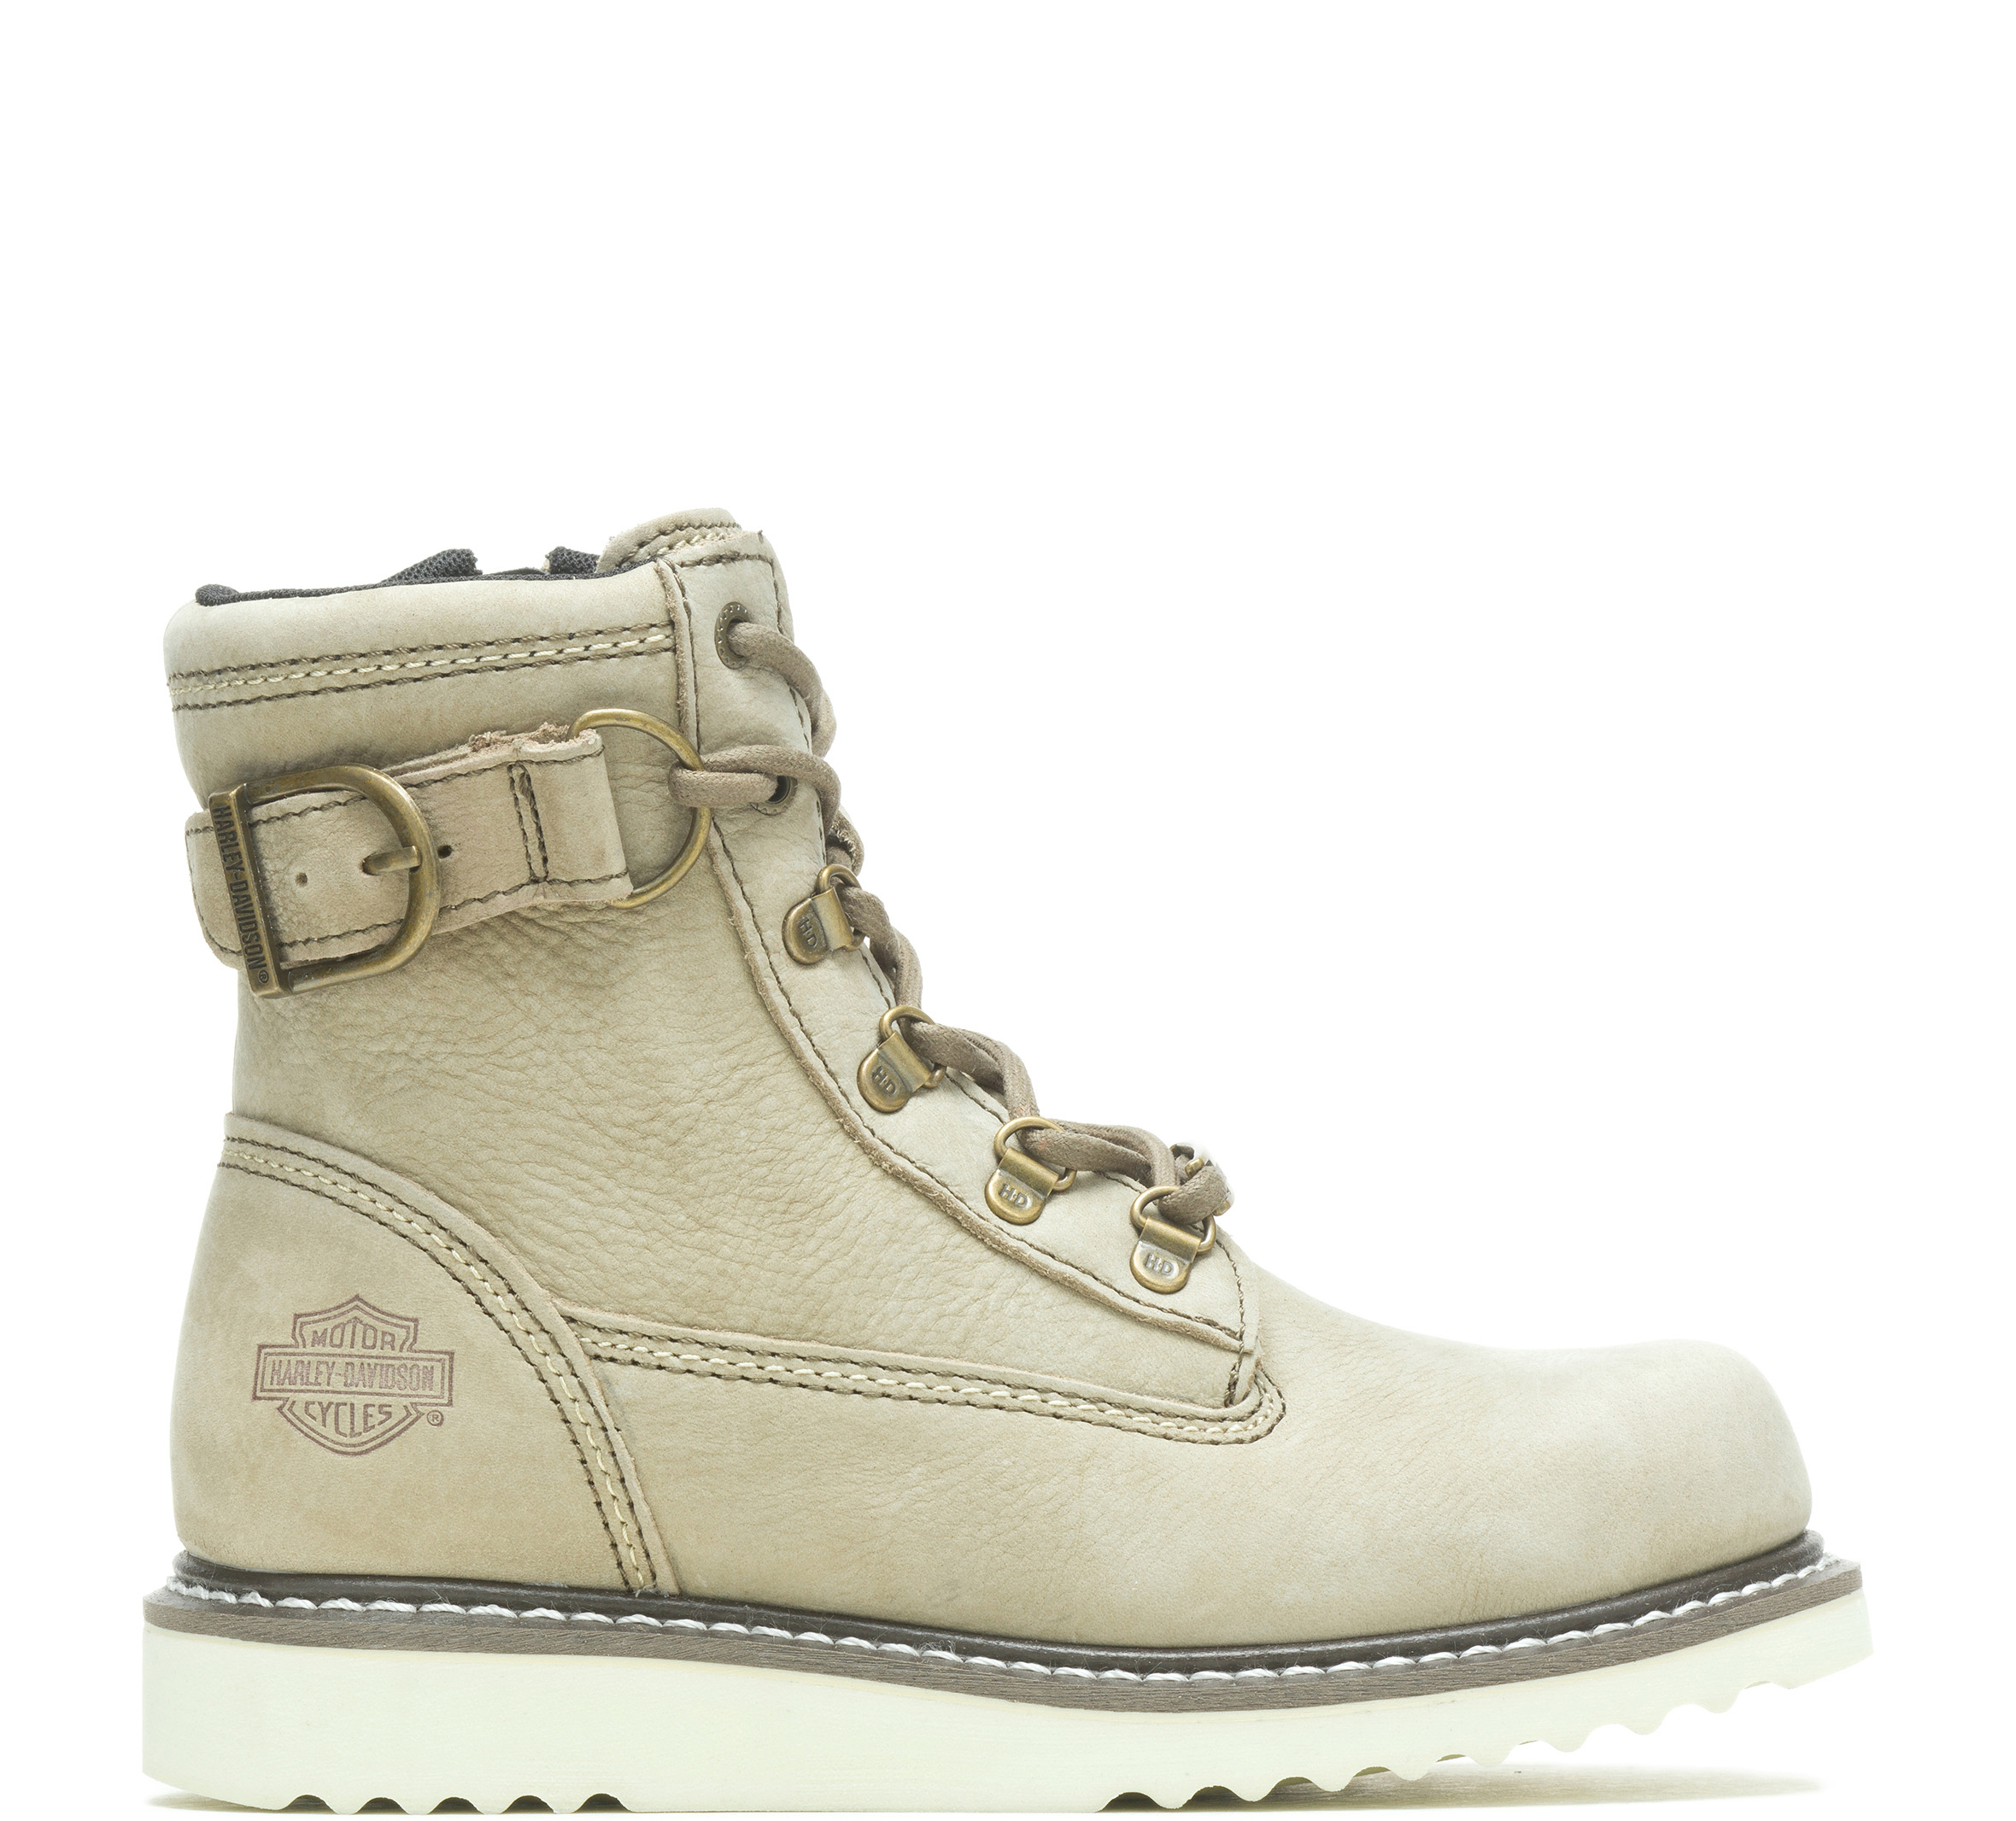 Womens Best Selling Boots | Harley-Davidson USA